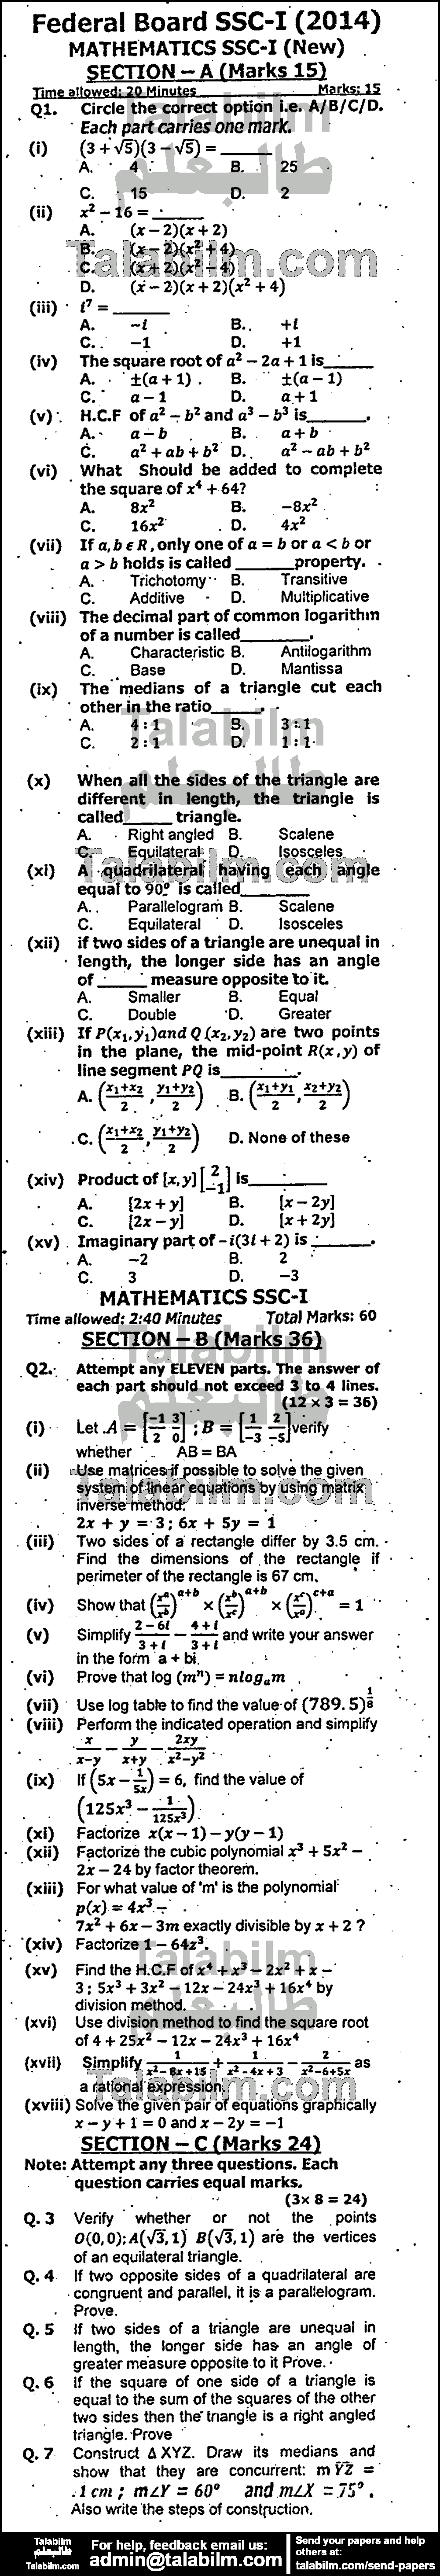 Math 0 past paper for 2014 Group-I